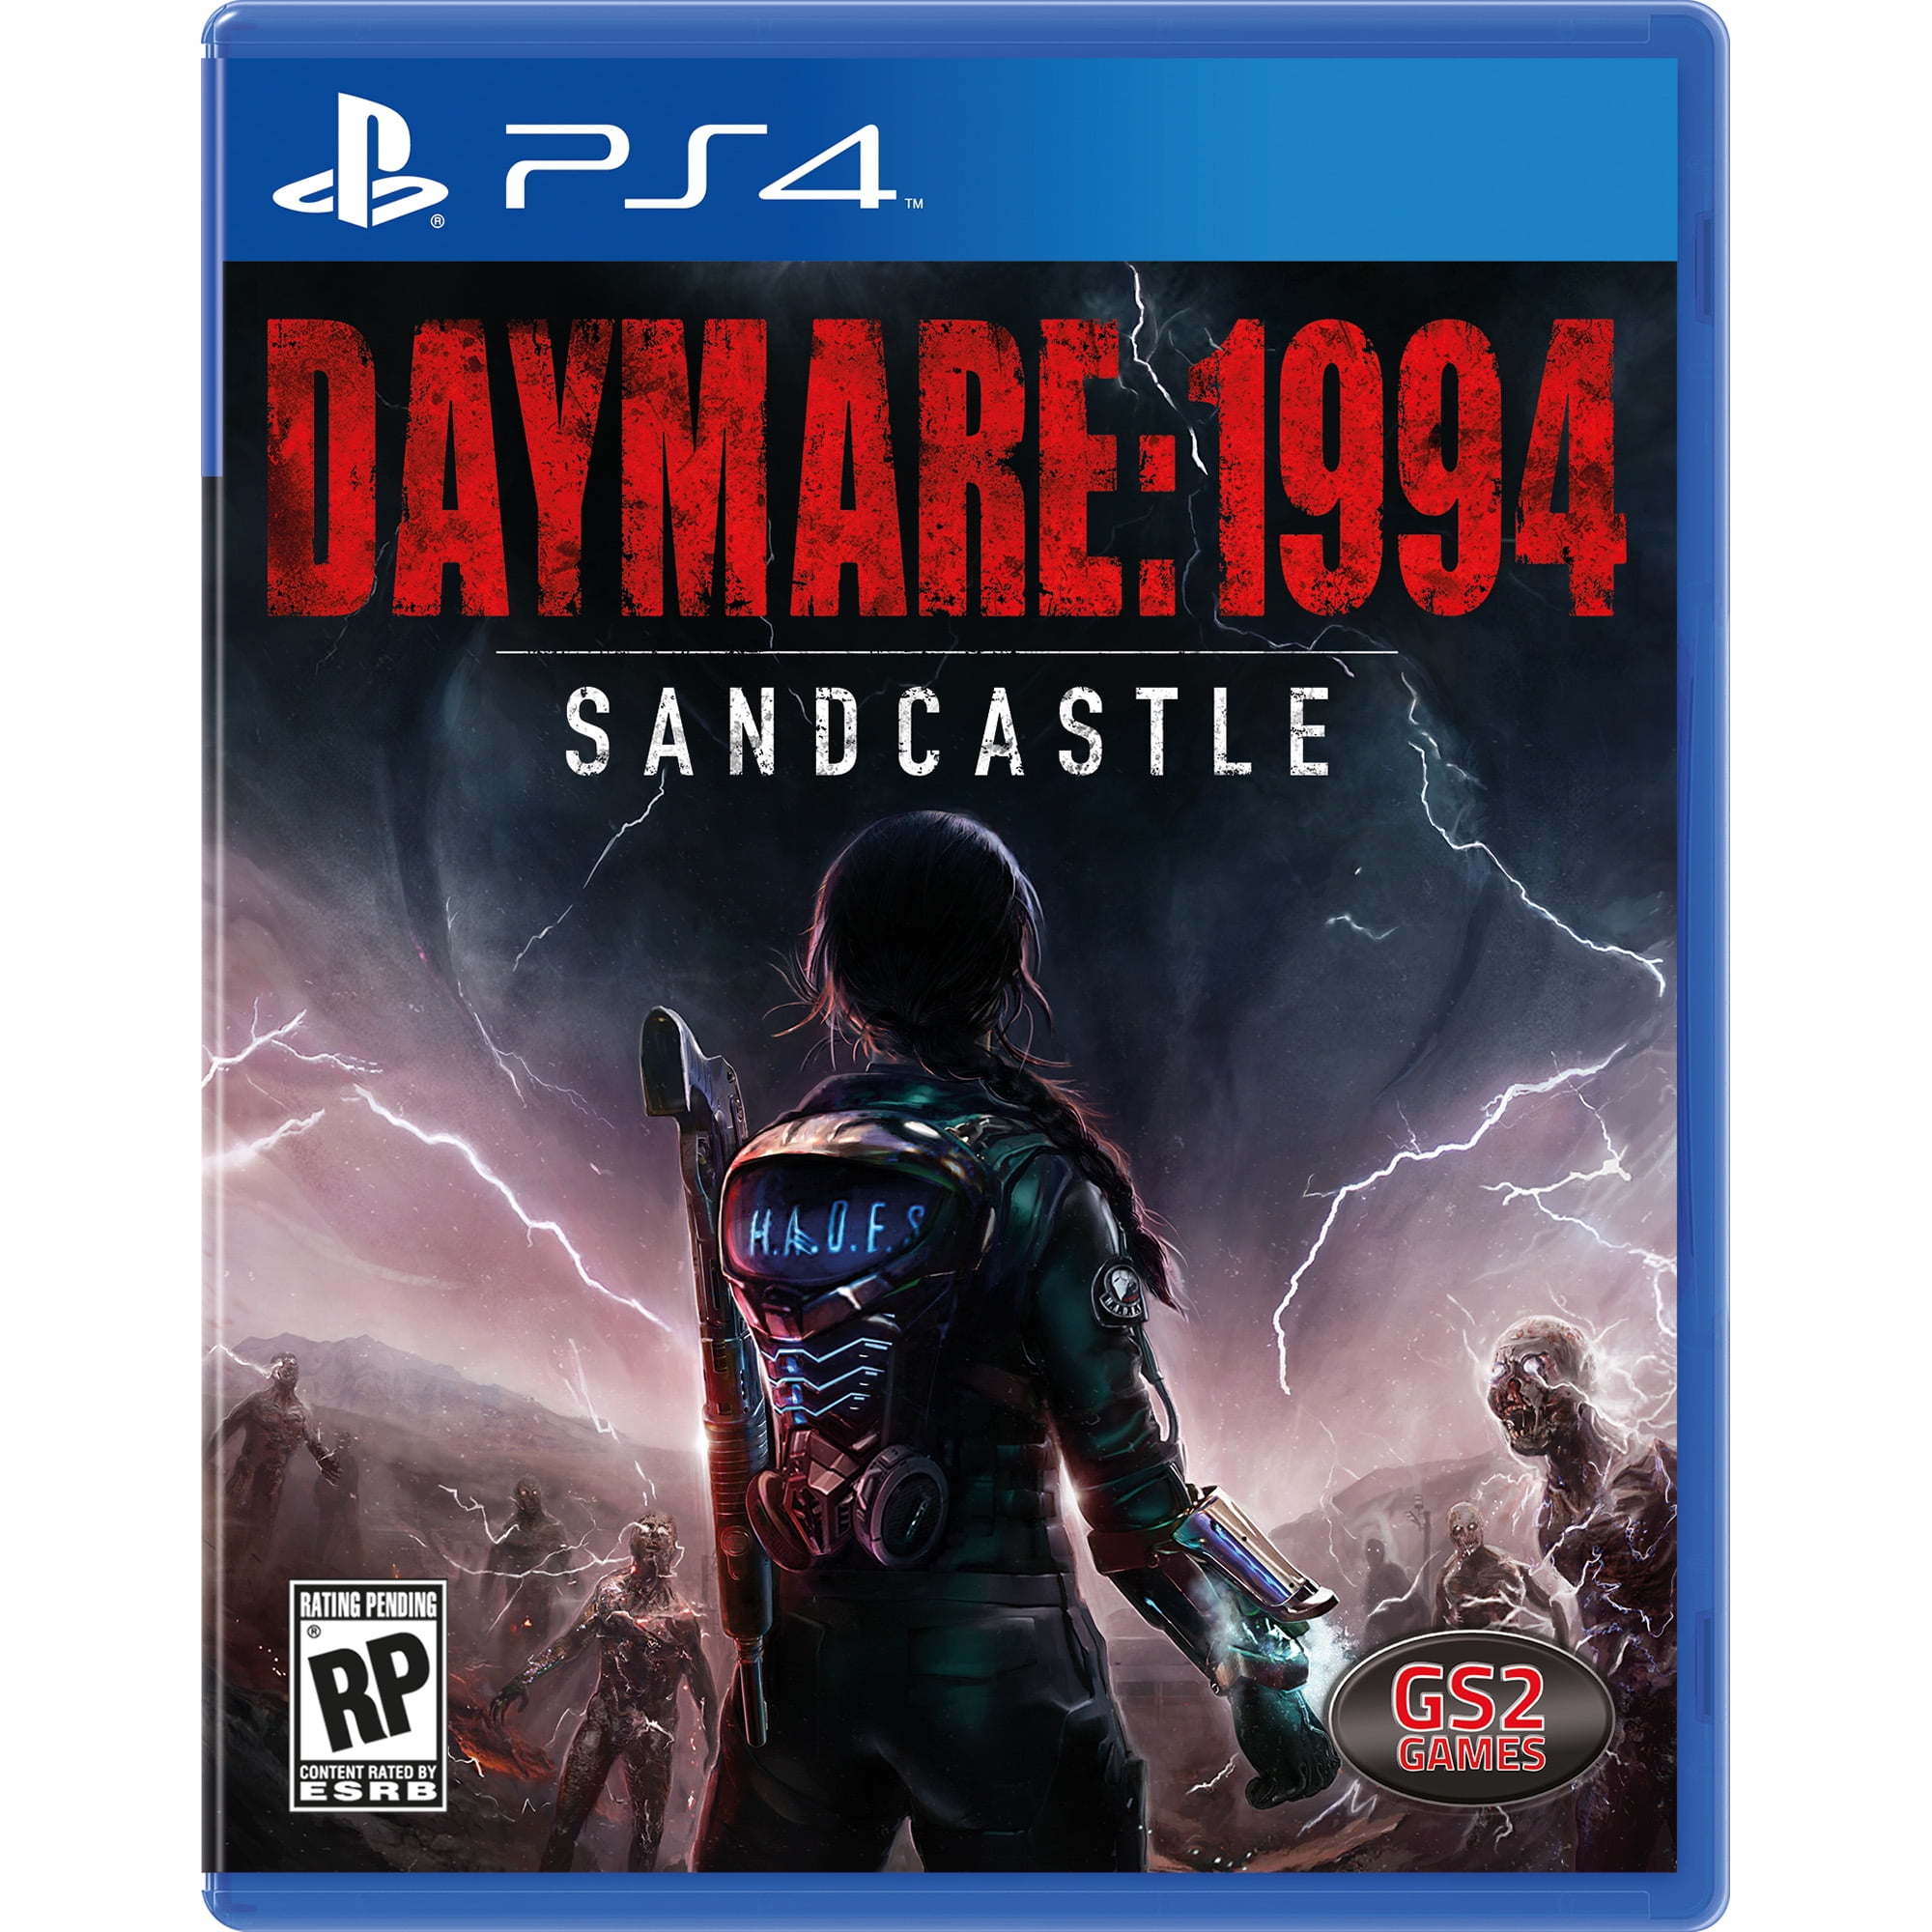 Daymare: 1994 Sandcastle, GS2 Games, PlayStation 4, GS00100 